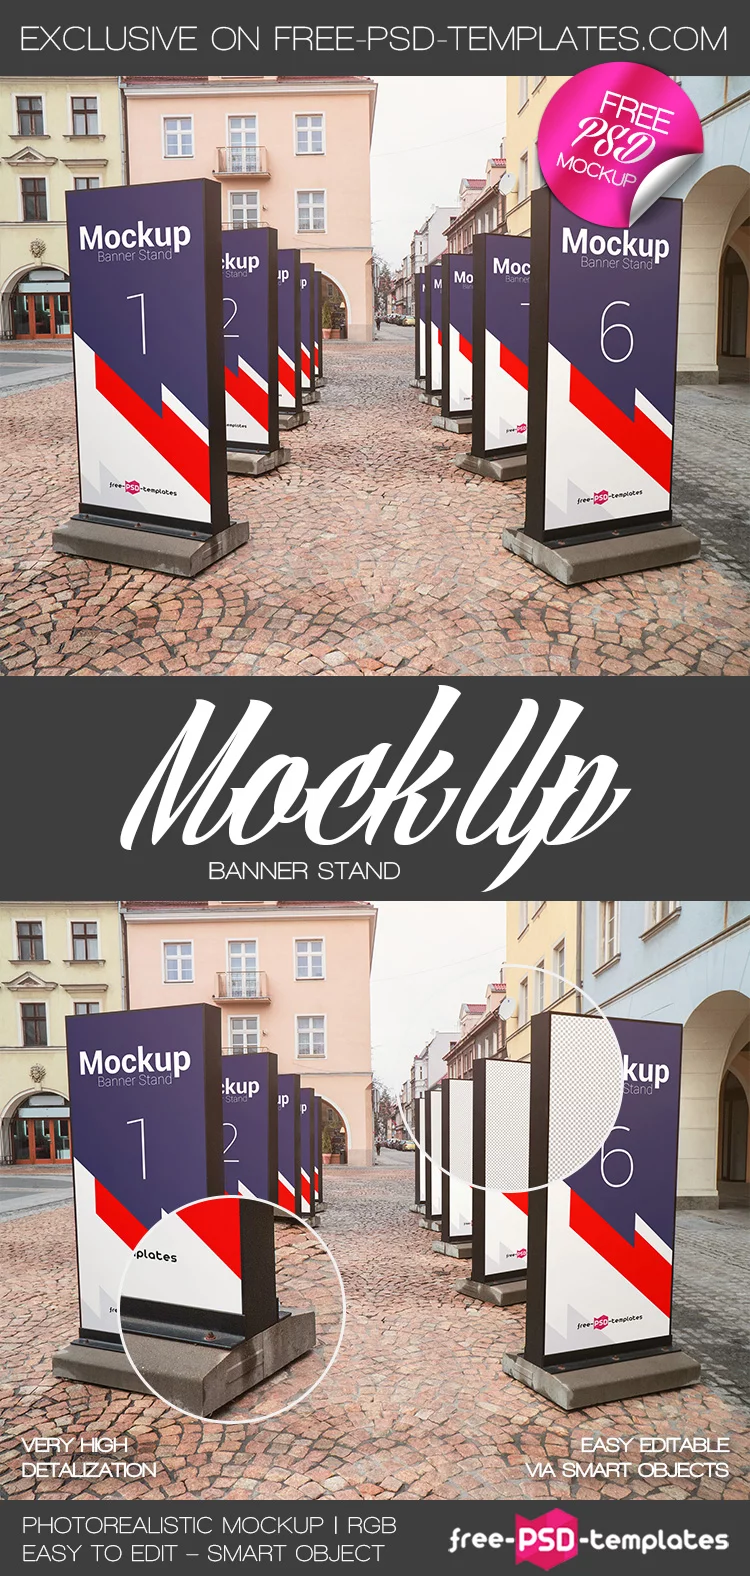 Free Banner Stand Mock-up in PSD